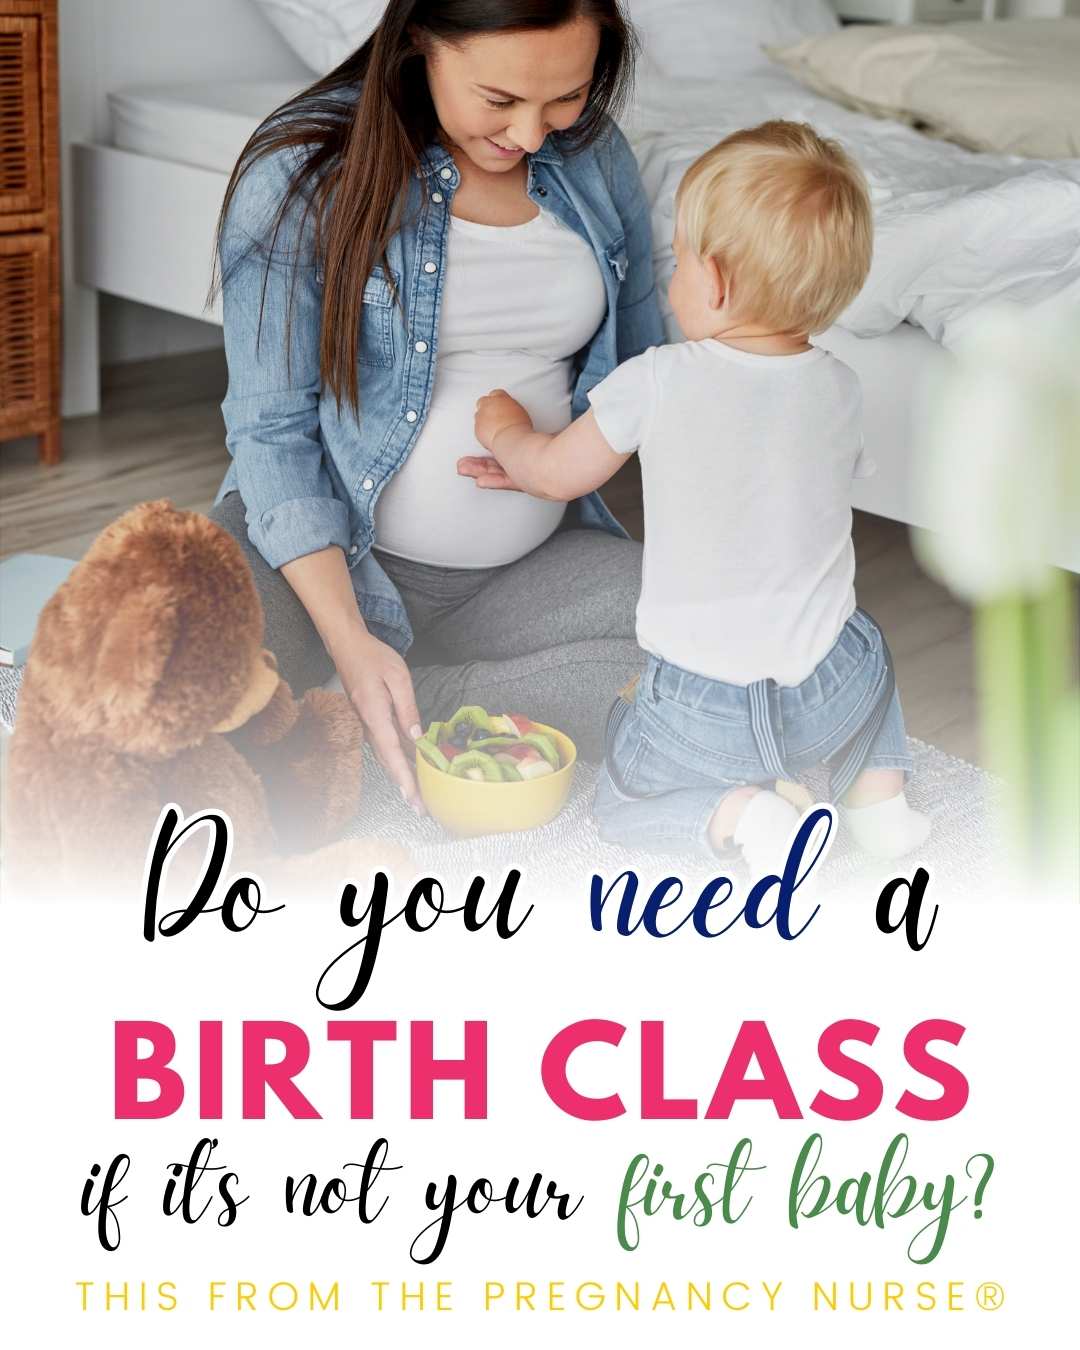 pregnant mom with toddler / do you need a birth class if it's not your first baby?